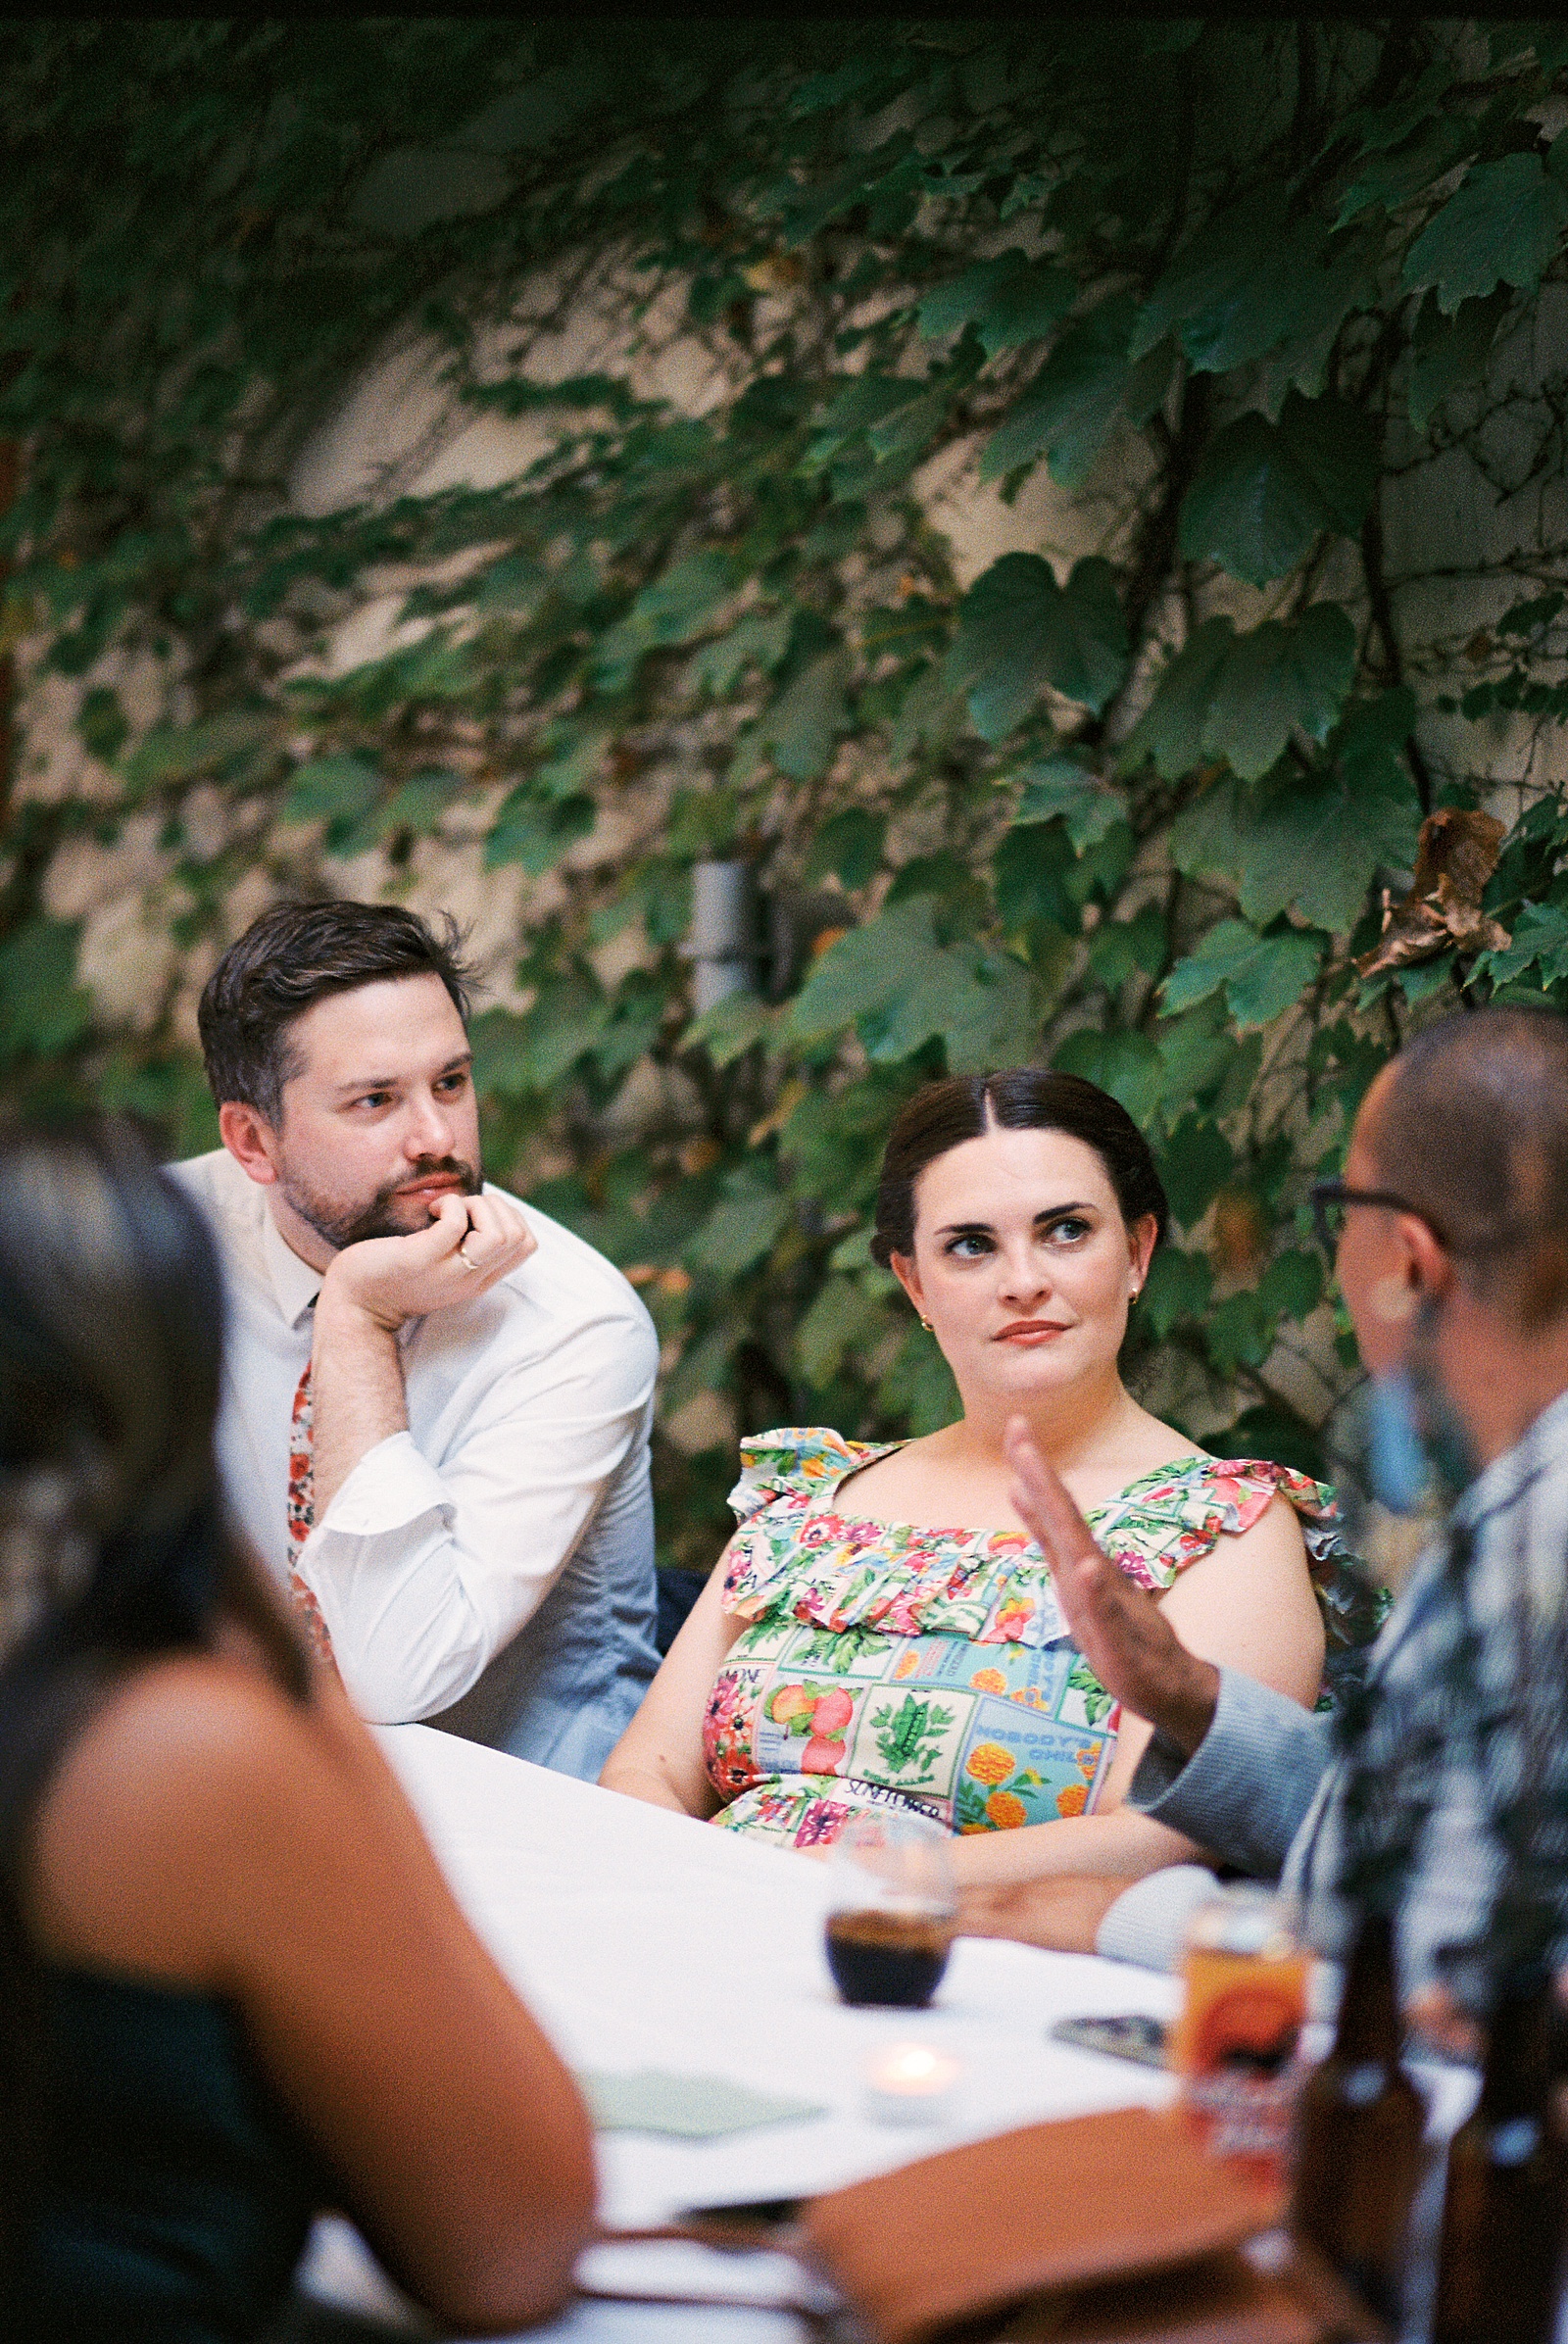 Wedding guests in floral print sit at a reception table in conversation.